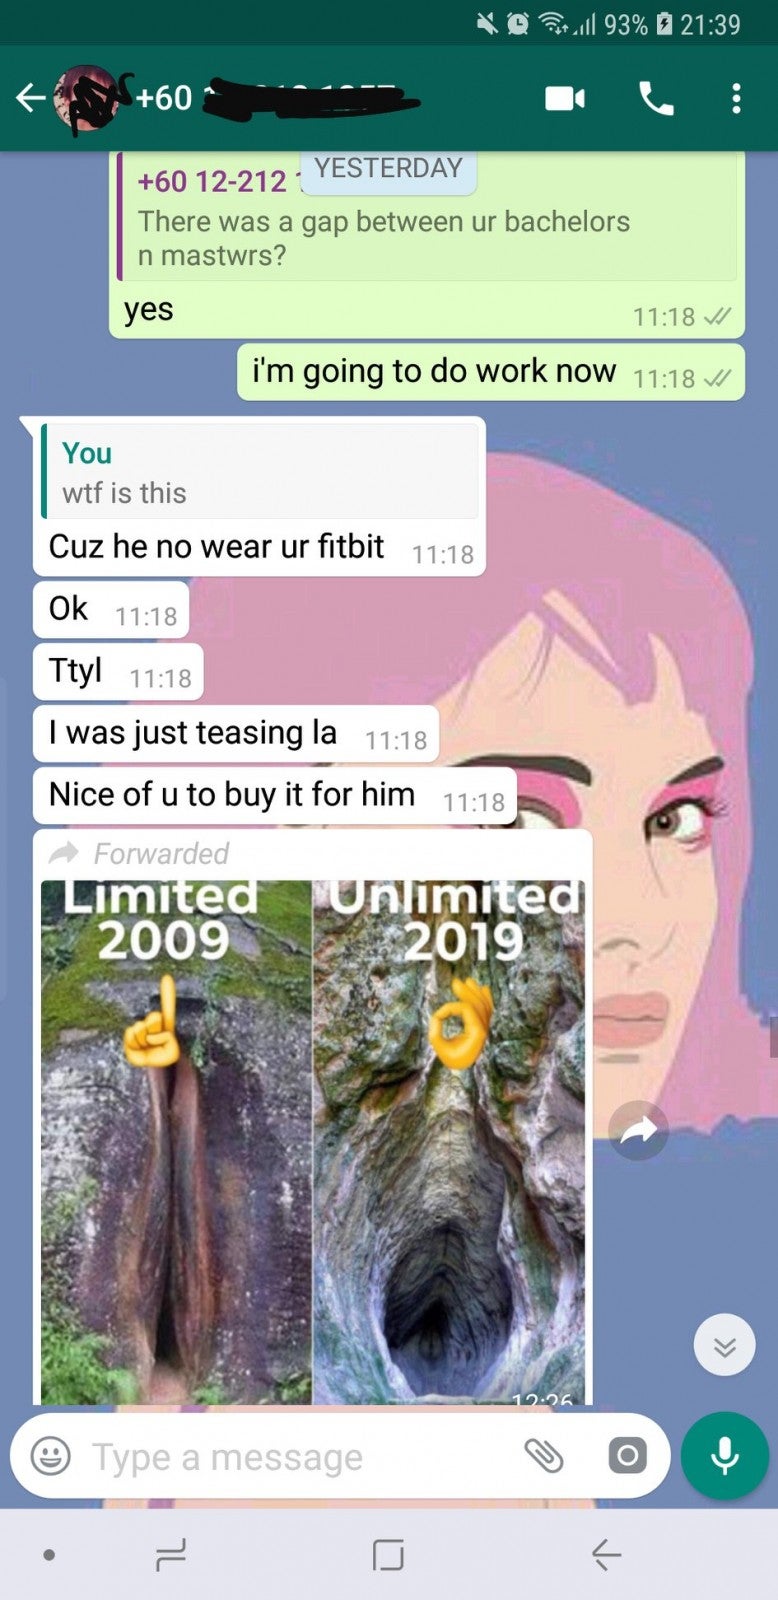 M'sian Woman Shares Horrific Experience With A Guy After Rejecting Him On Tinder - WORLD OF BUZZ 5